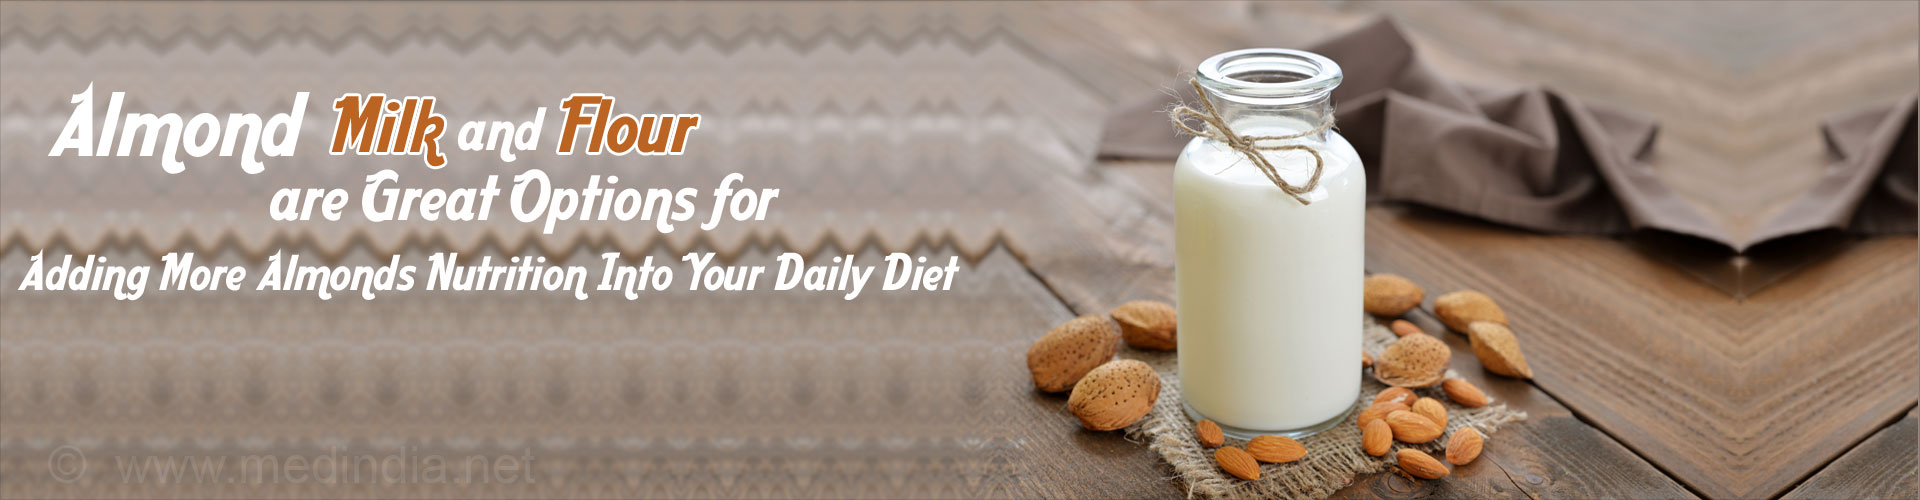 Almond Milk and Flour are Great Options for Adding More Almond Nutrition Into Your Daily Diet